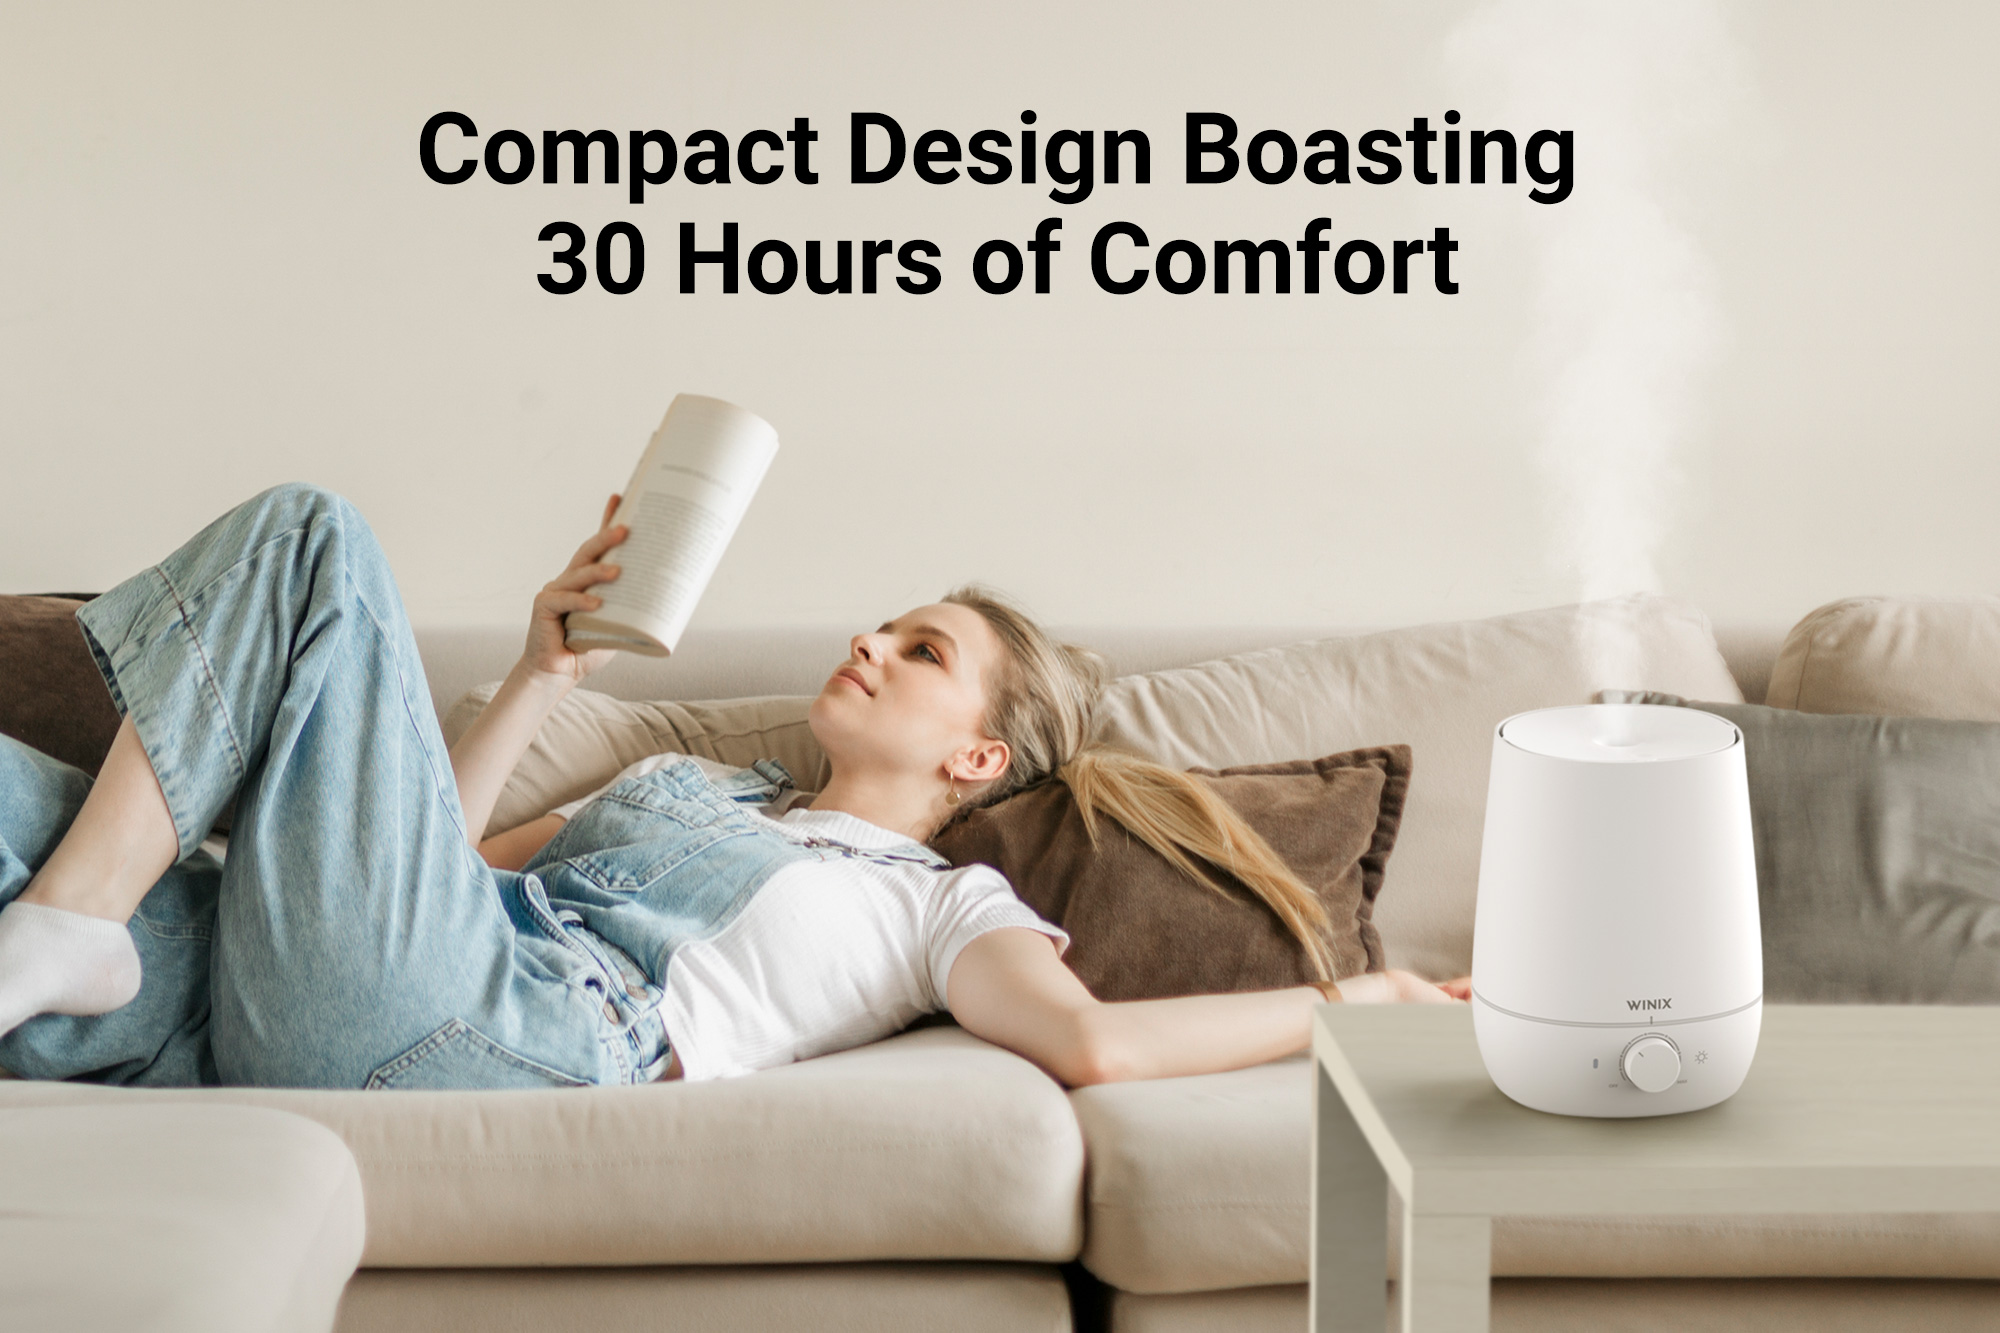 L60 Humidifier on coffee table next to woman relaxing on a couch and text saying compact design boasting 30 hours of comfort